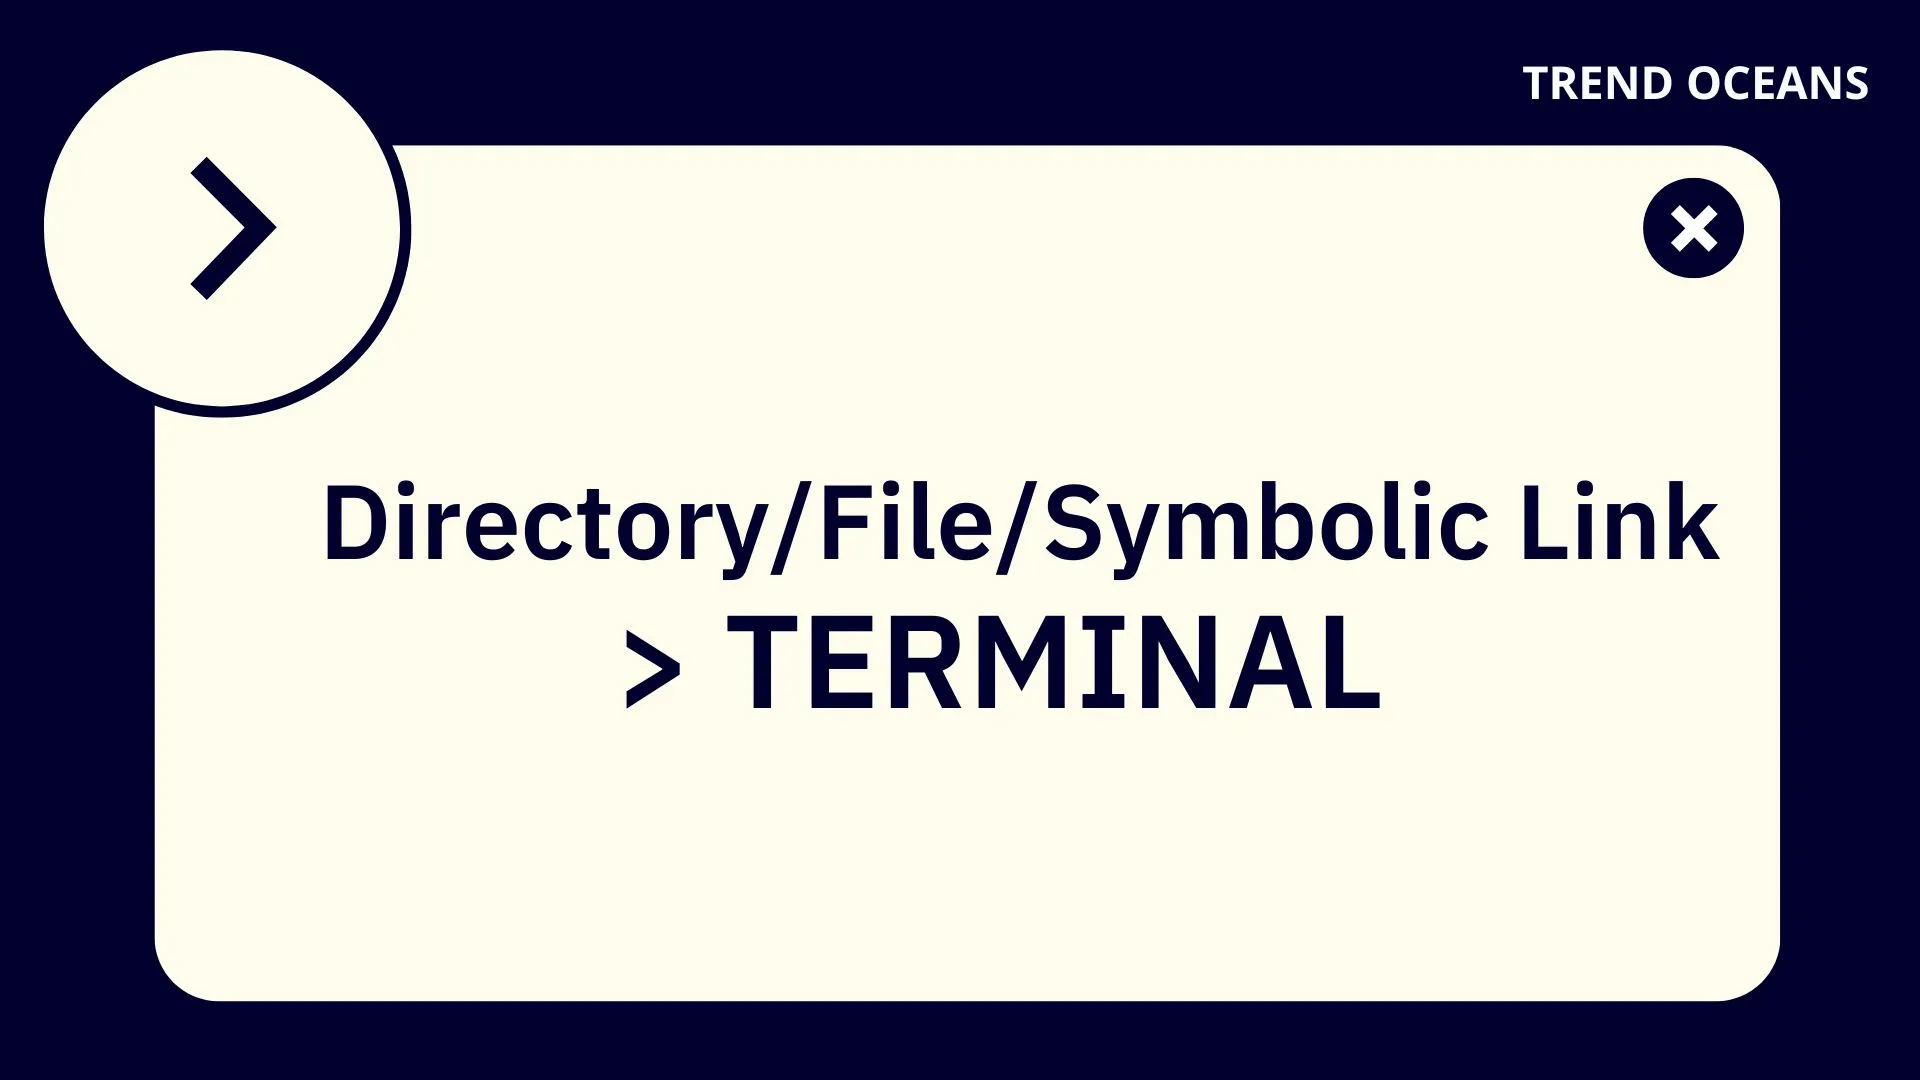 How do I check if a directory or file exists in a Bash shell script